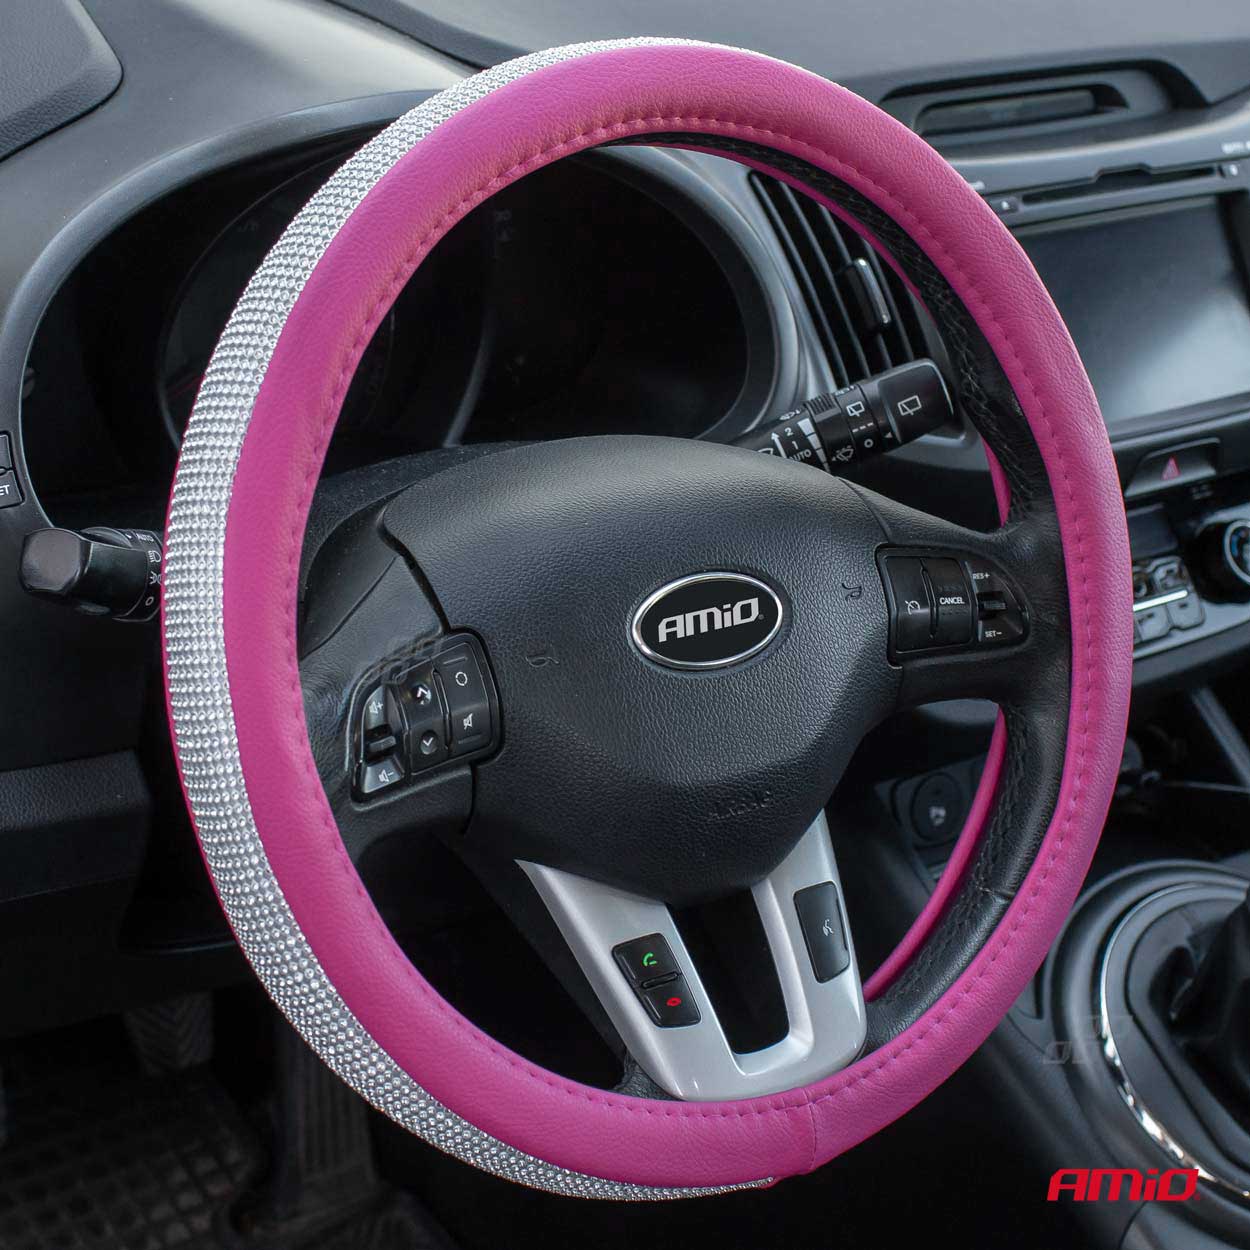 Amio steering wheel cover SWC-36-M - Ø 37-39 cm- Pink/Silver thumb